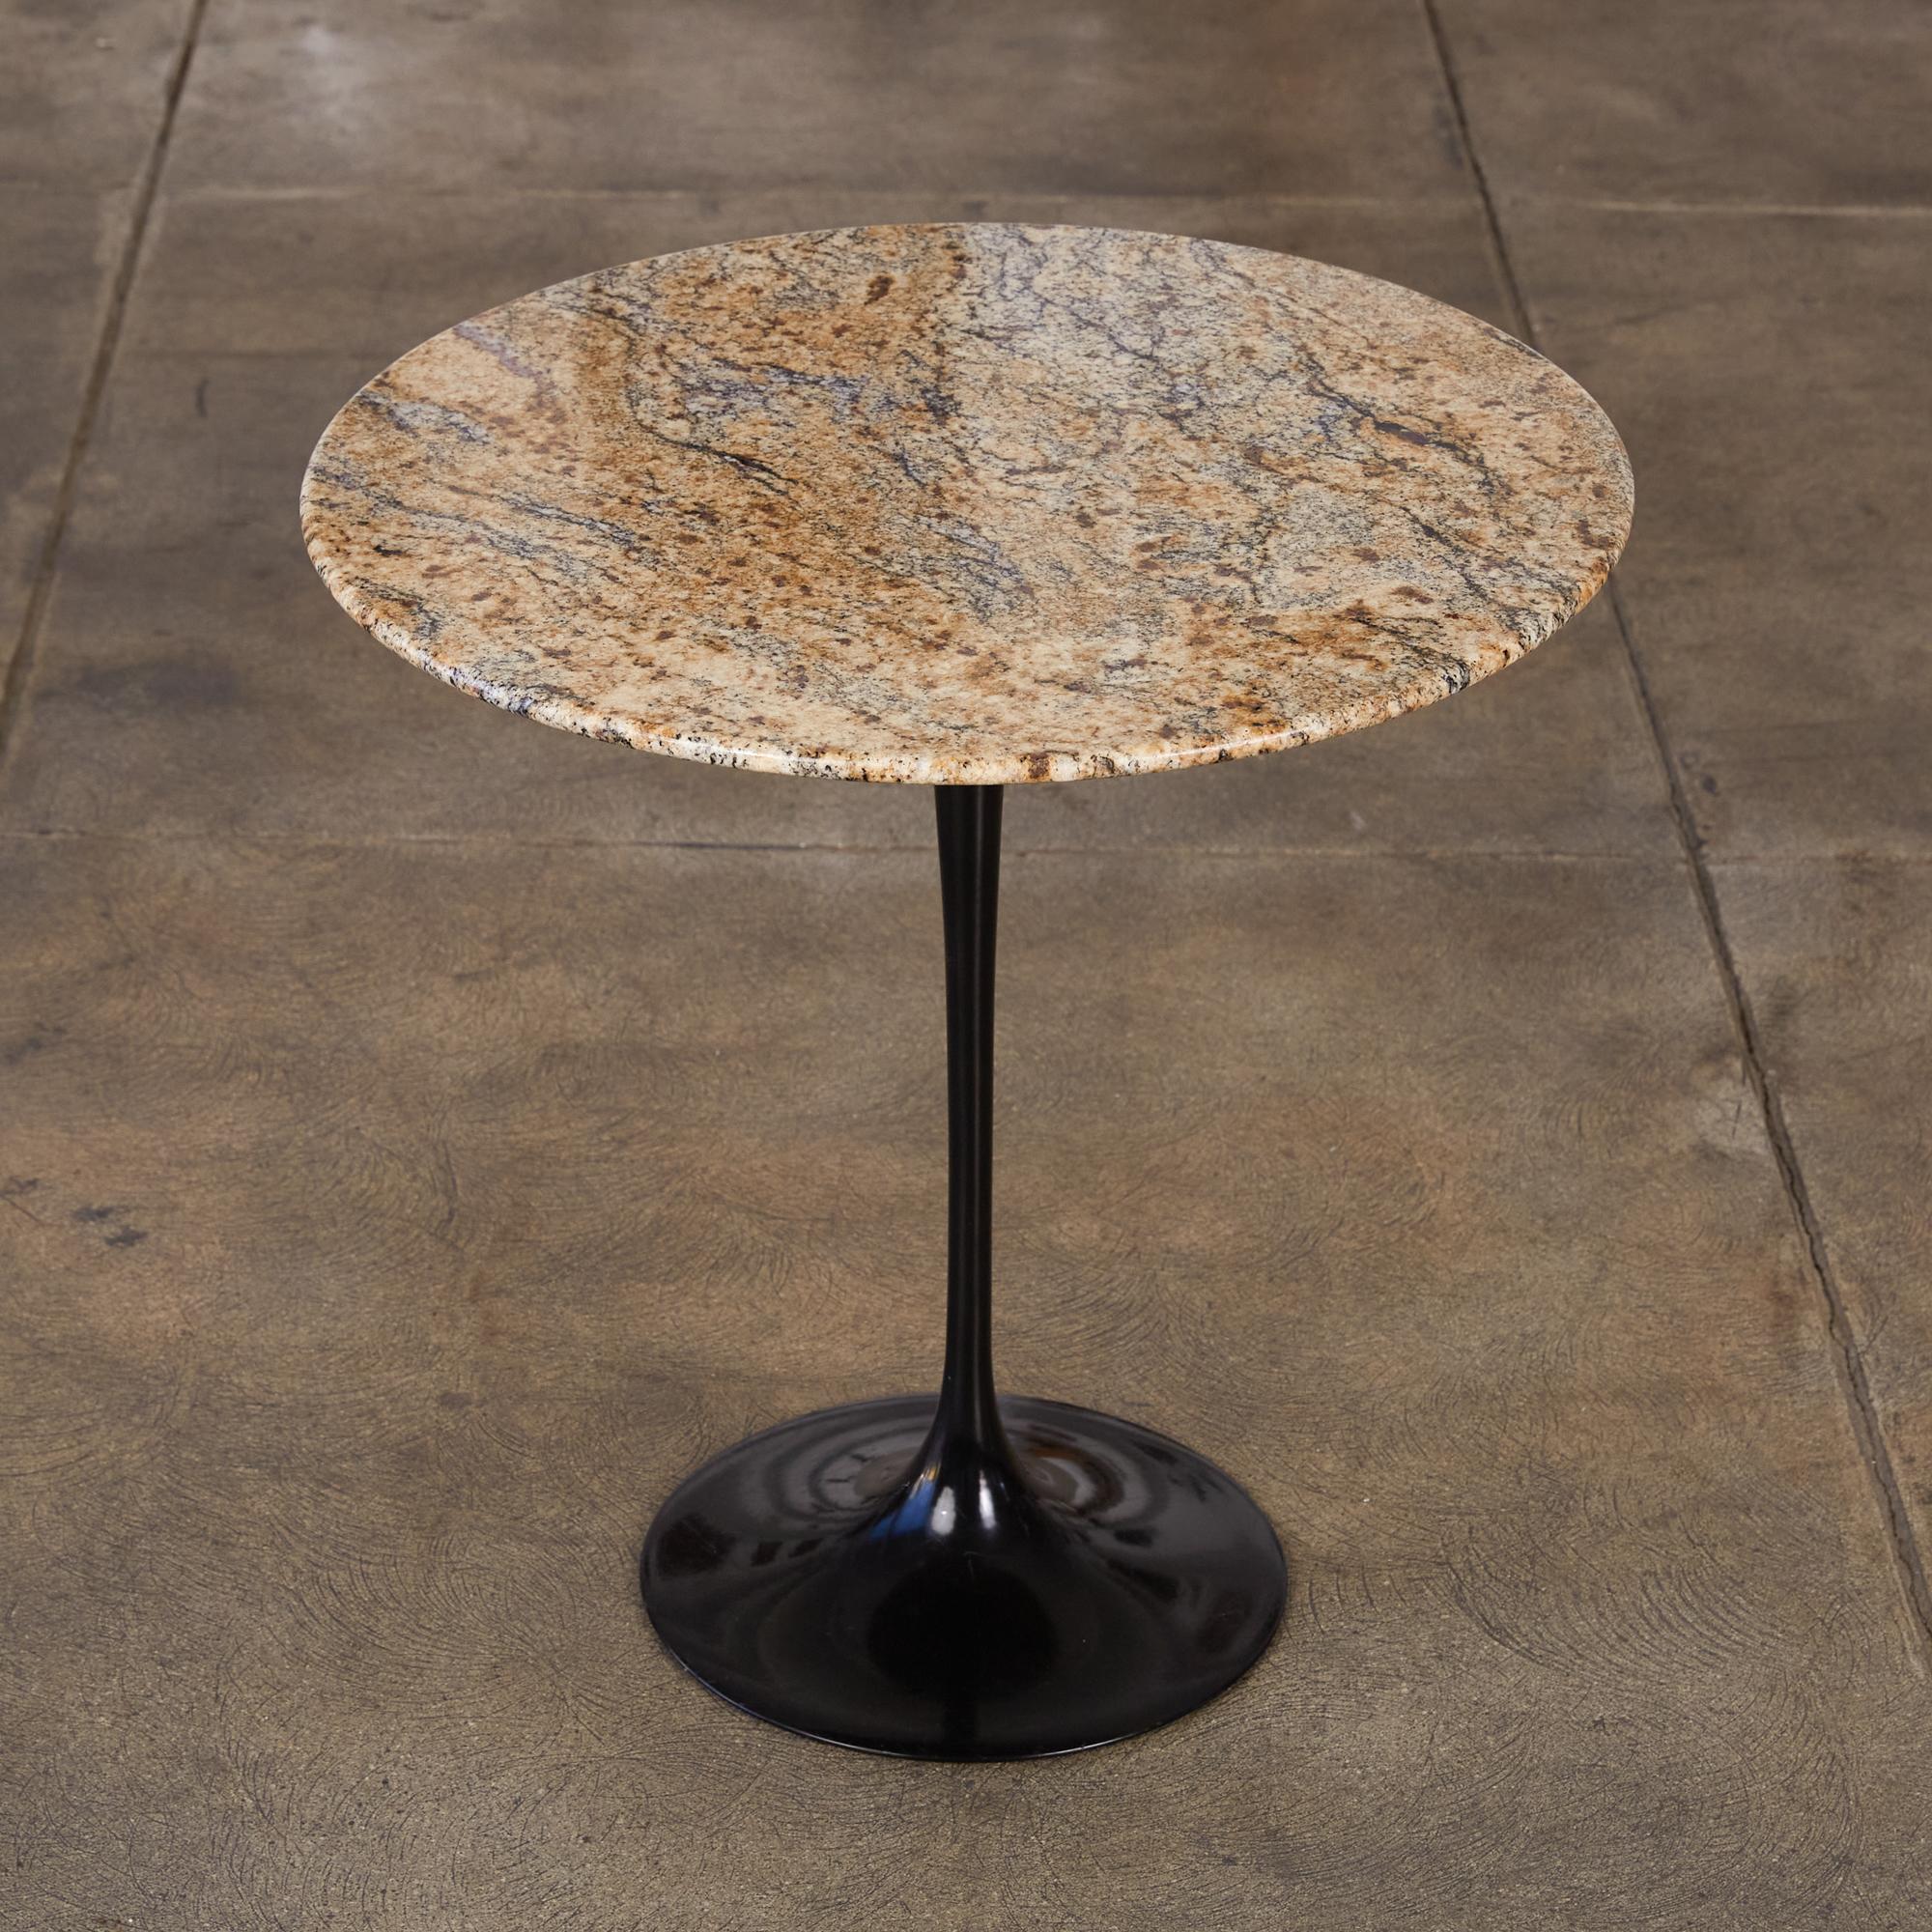 One of Saarinen’s most enduring designs, part of the Pedestal Collection and designed in 1957, this side table features a black heavy molded cast aluminum base with a round light brown and black veined granite top.

Dimensions: 20” diameter x